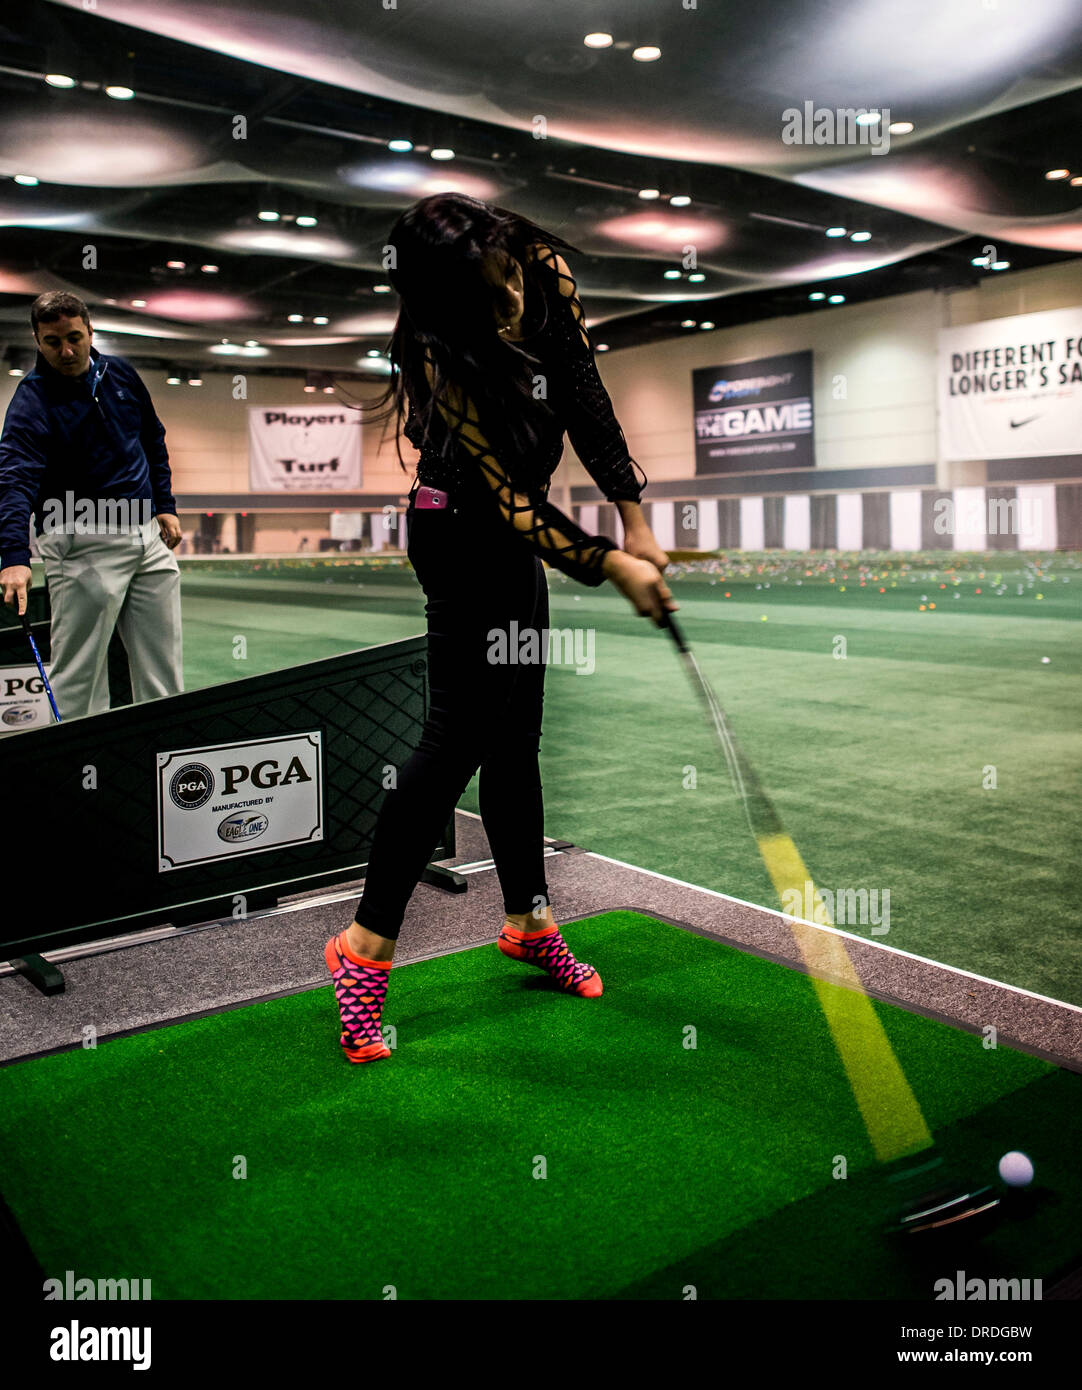 Orlando, Florida, USA. 22nd Jan, 2014. TORI JONES of Ashland, Ohio, tries out a new driver during the PGA Merchandise Show at the Orange County Convention Center. With over one million square feet of exhibit space and 41,000 attendees from all 50 U.S. states and 74 countries, the show serves as a global platform for PGA professionals, industry leaders, manufacturers and golf organizations to grow the business, participation and interest in golf. Credit:  Brian Cahn/ZUMAPRESS.com/Alamy Live News Stock Photo